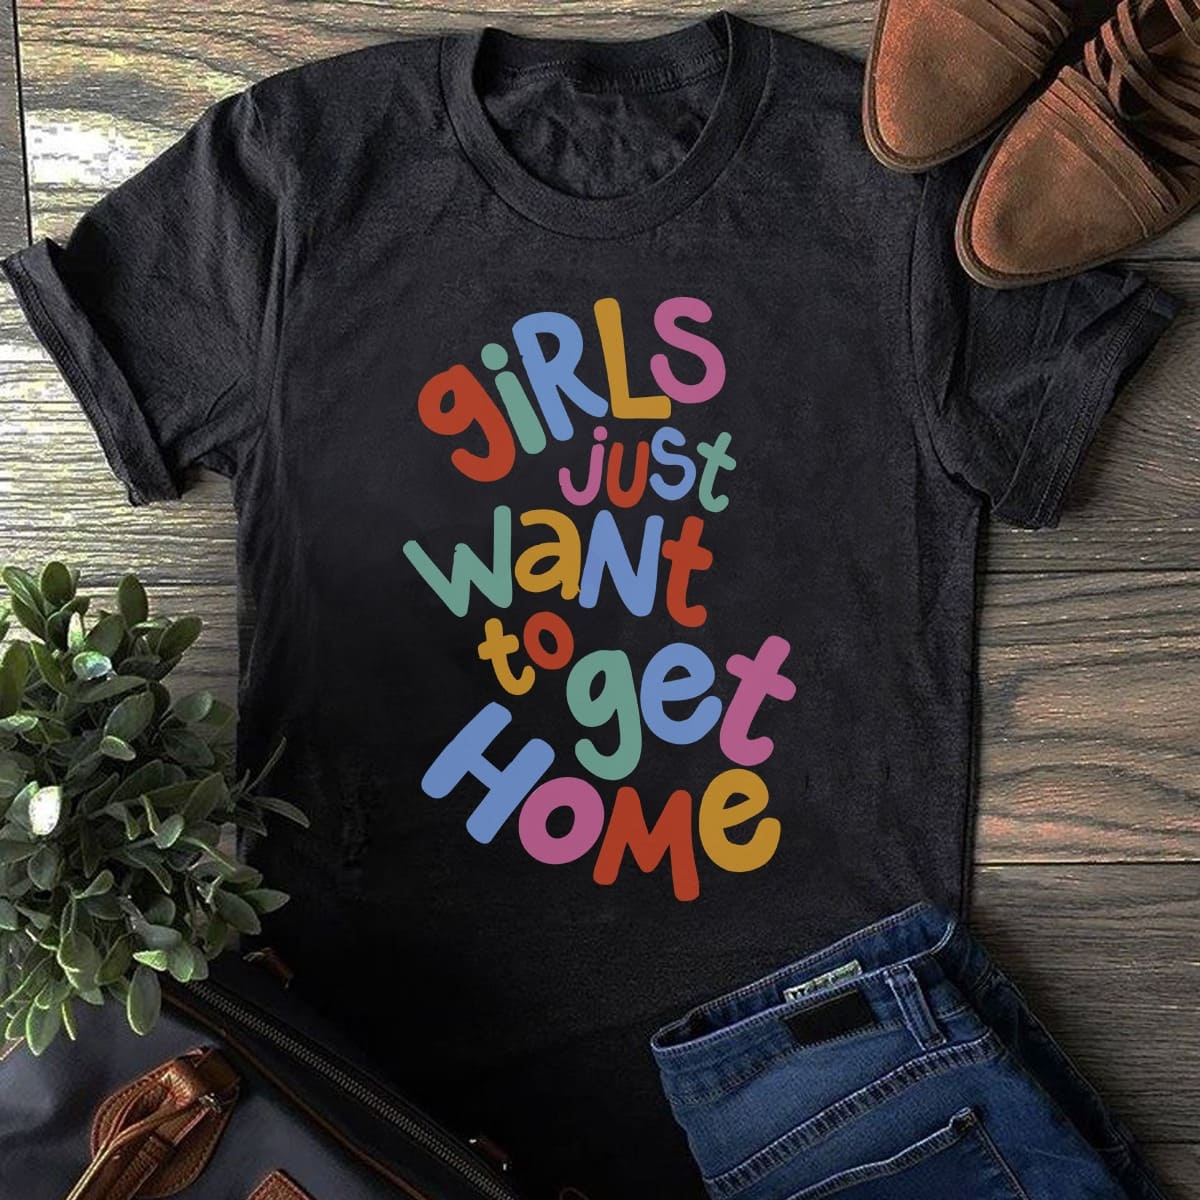 Girls just want to get home - Hometown lover, gift for girls